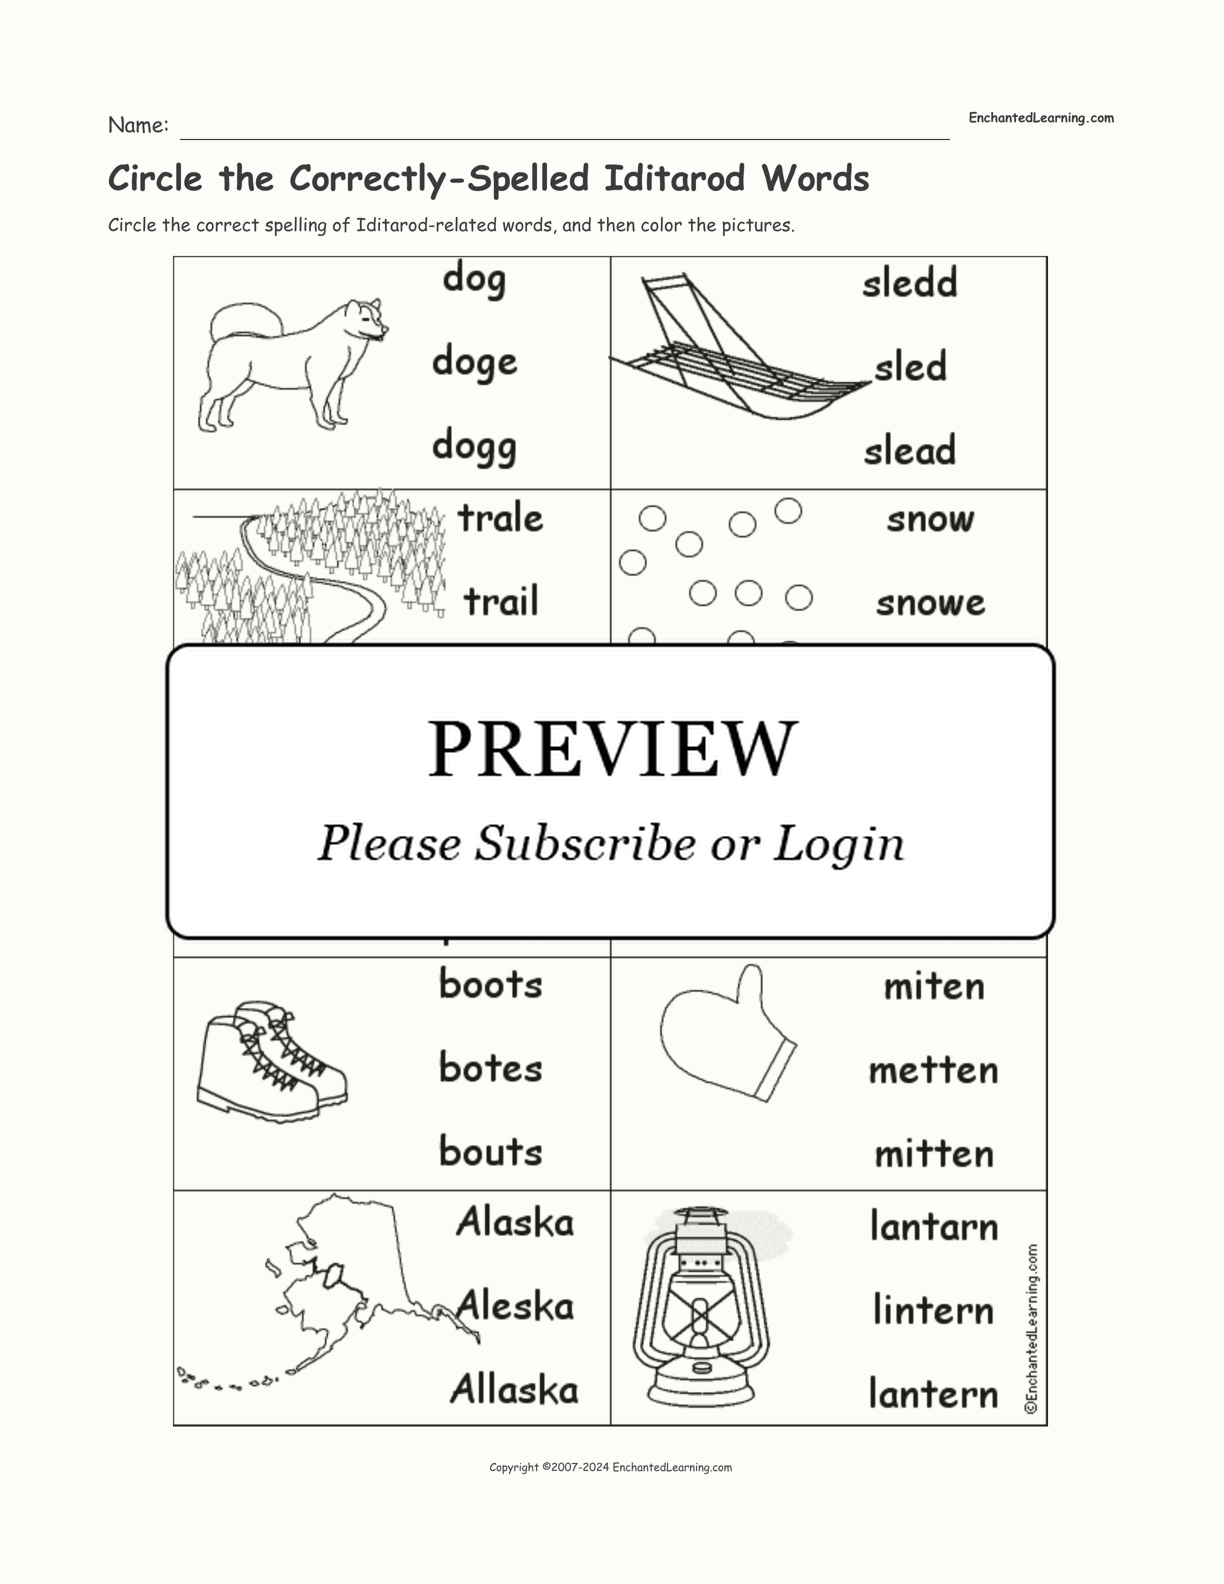 Circle the Correctly-Spelled Iditarod Words interactive worksheet page 1